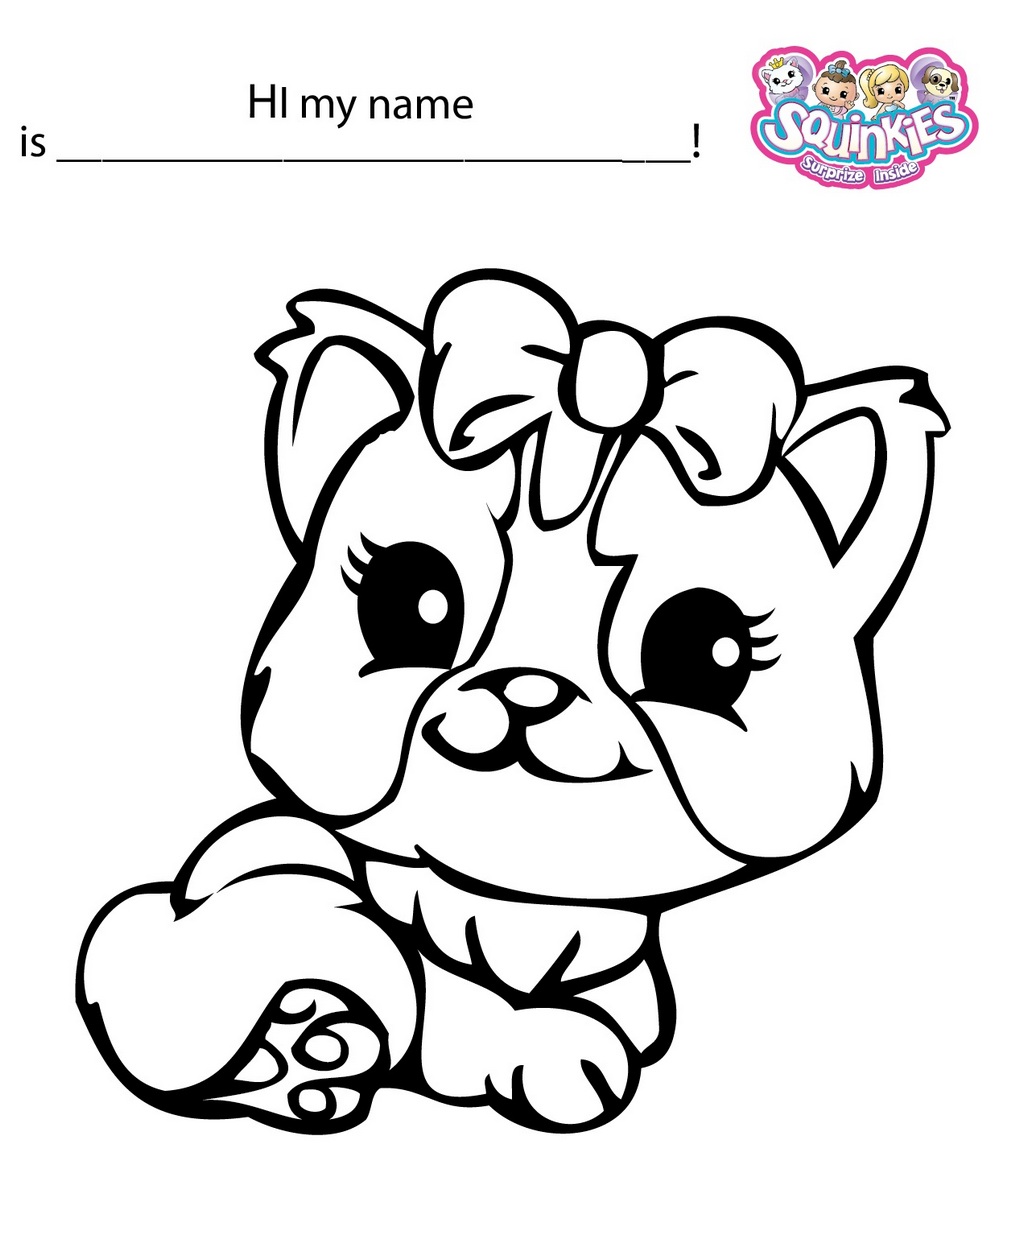 squinkies toys coloring and activity page